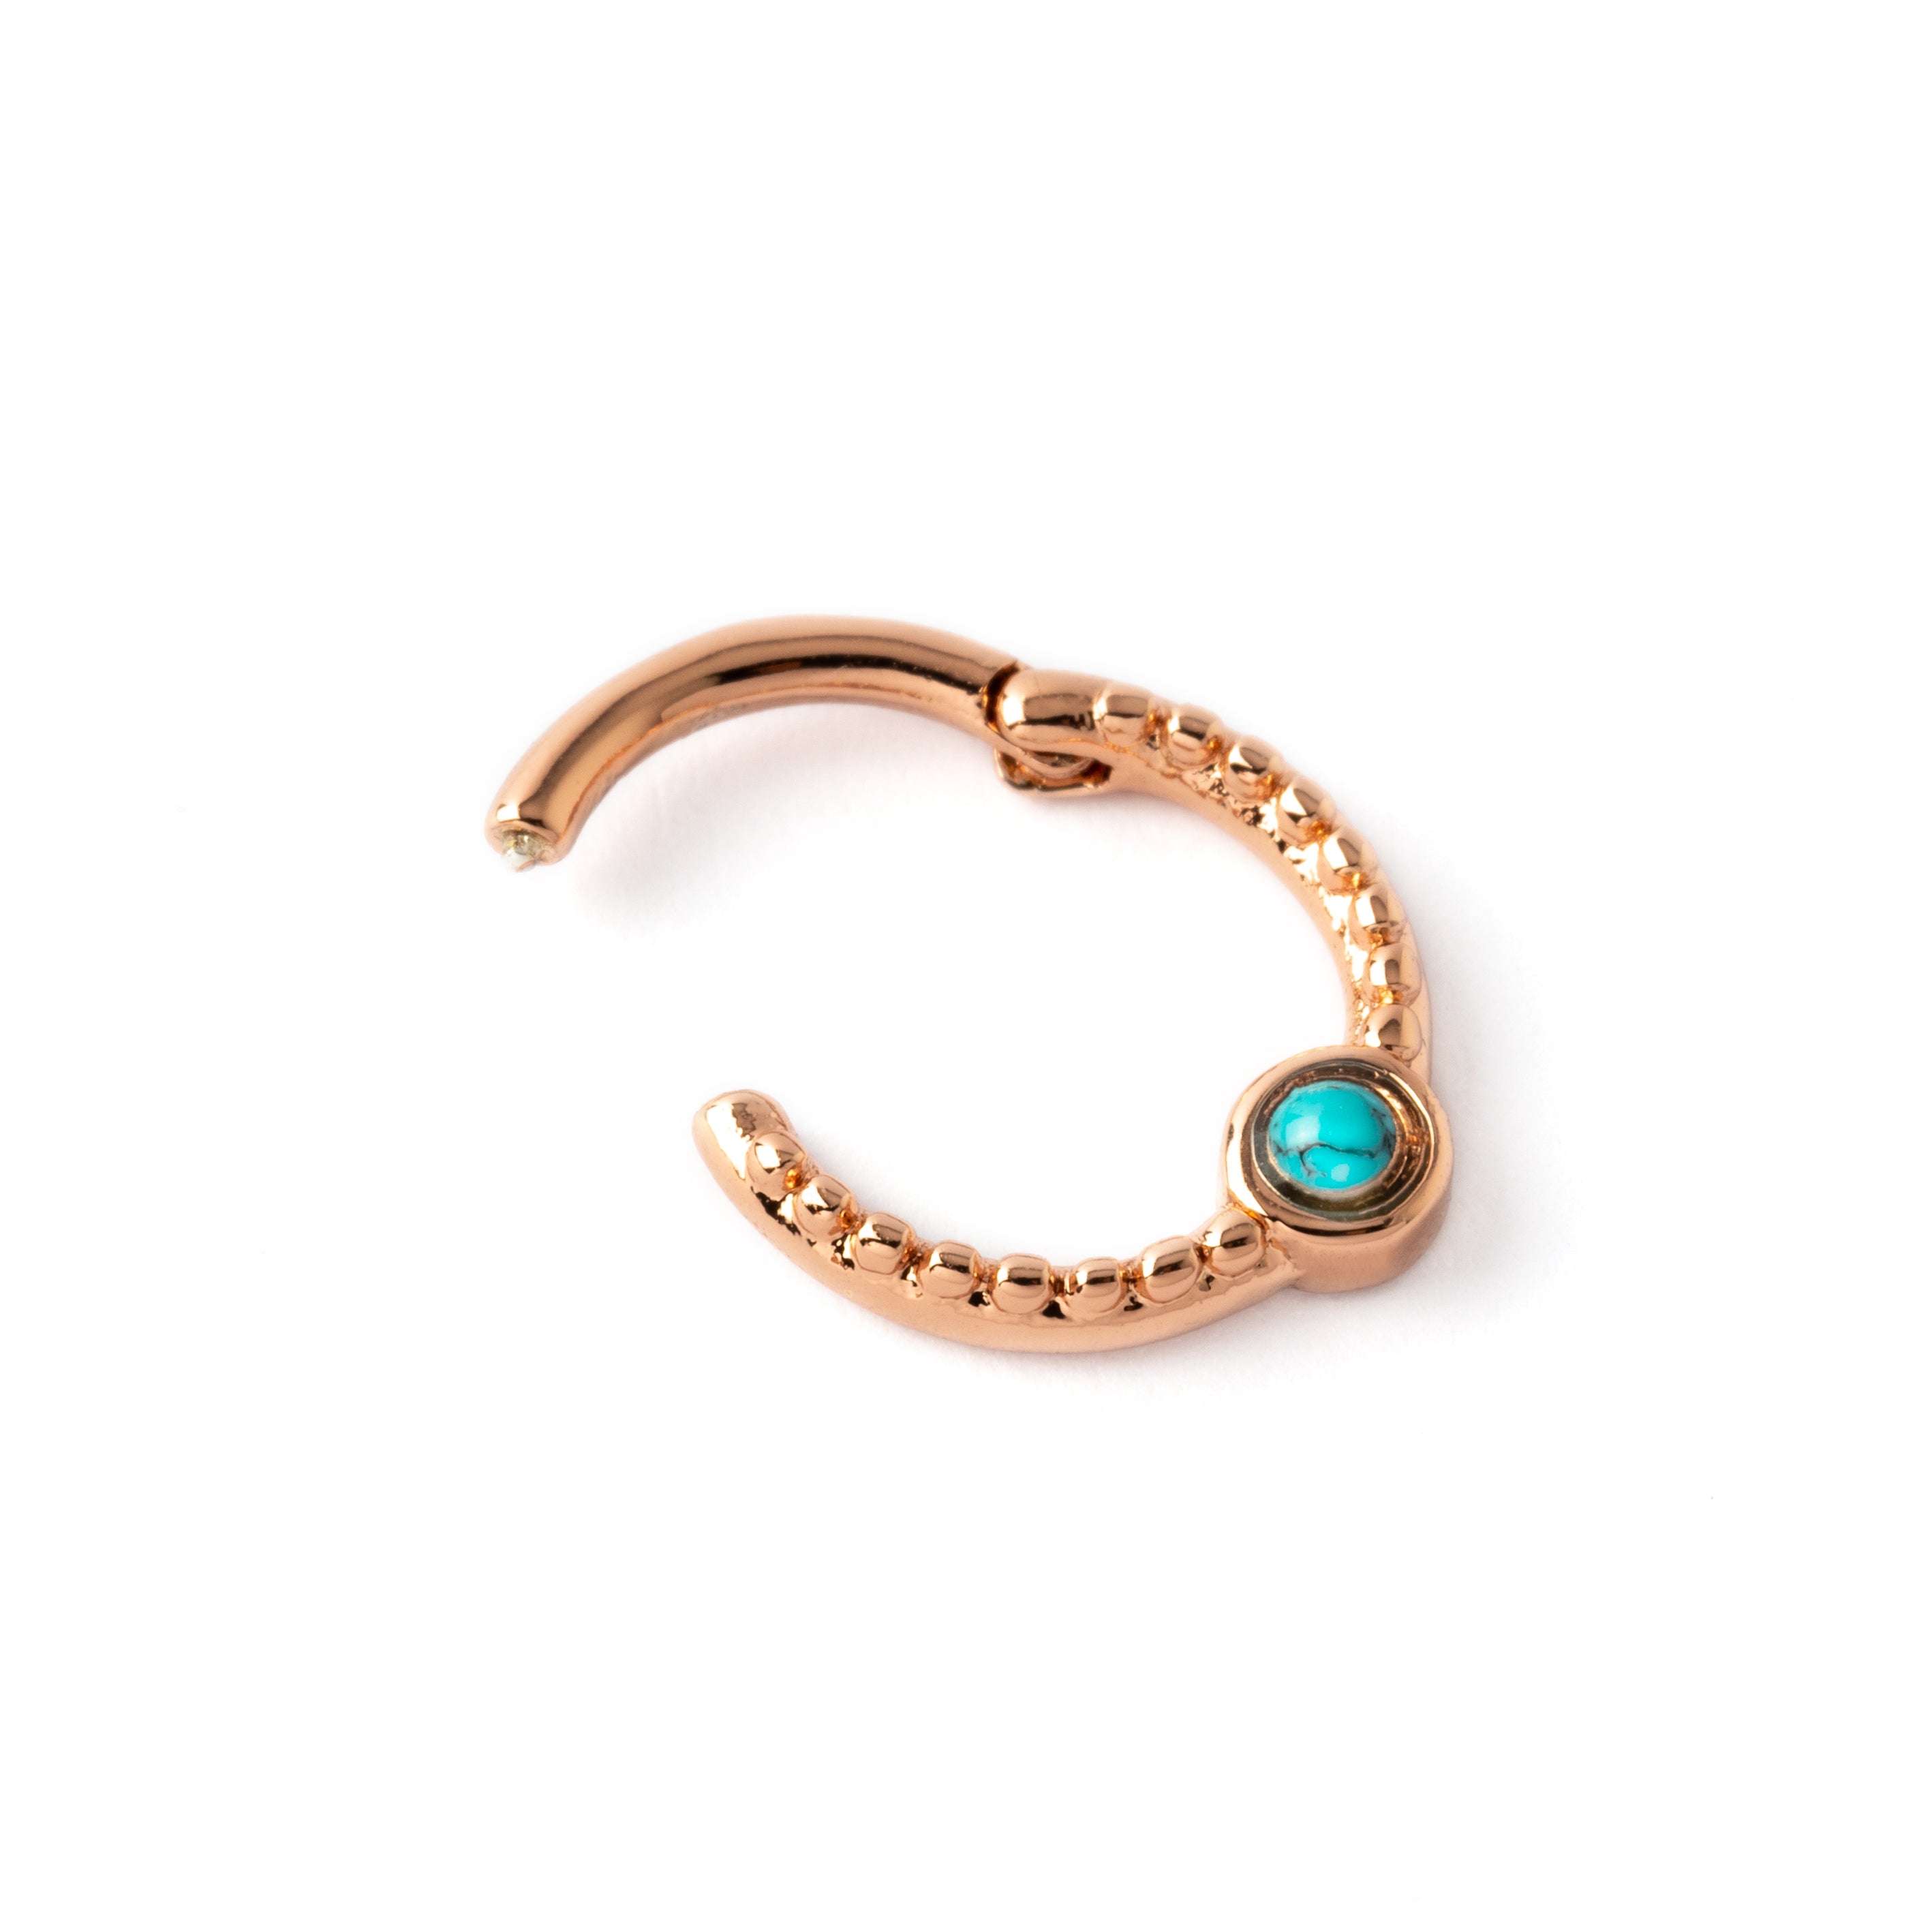 Dayaa rose gold surgical steel septum clicker with turquoise closure view